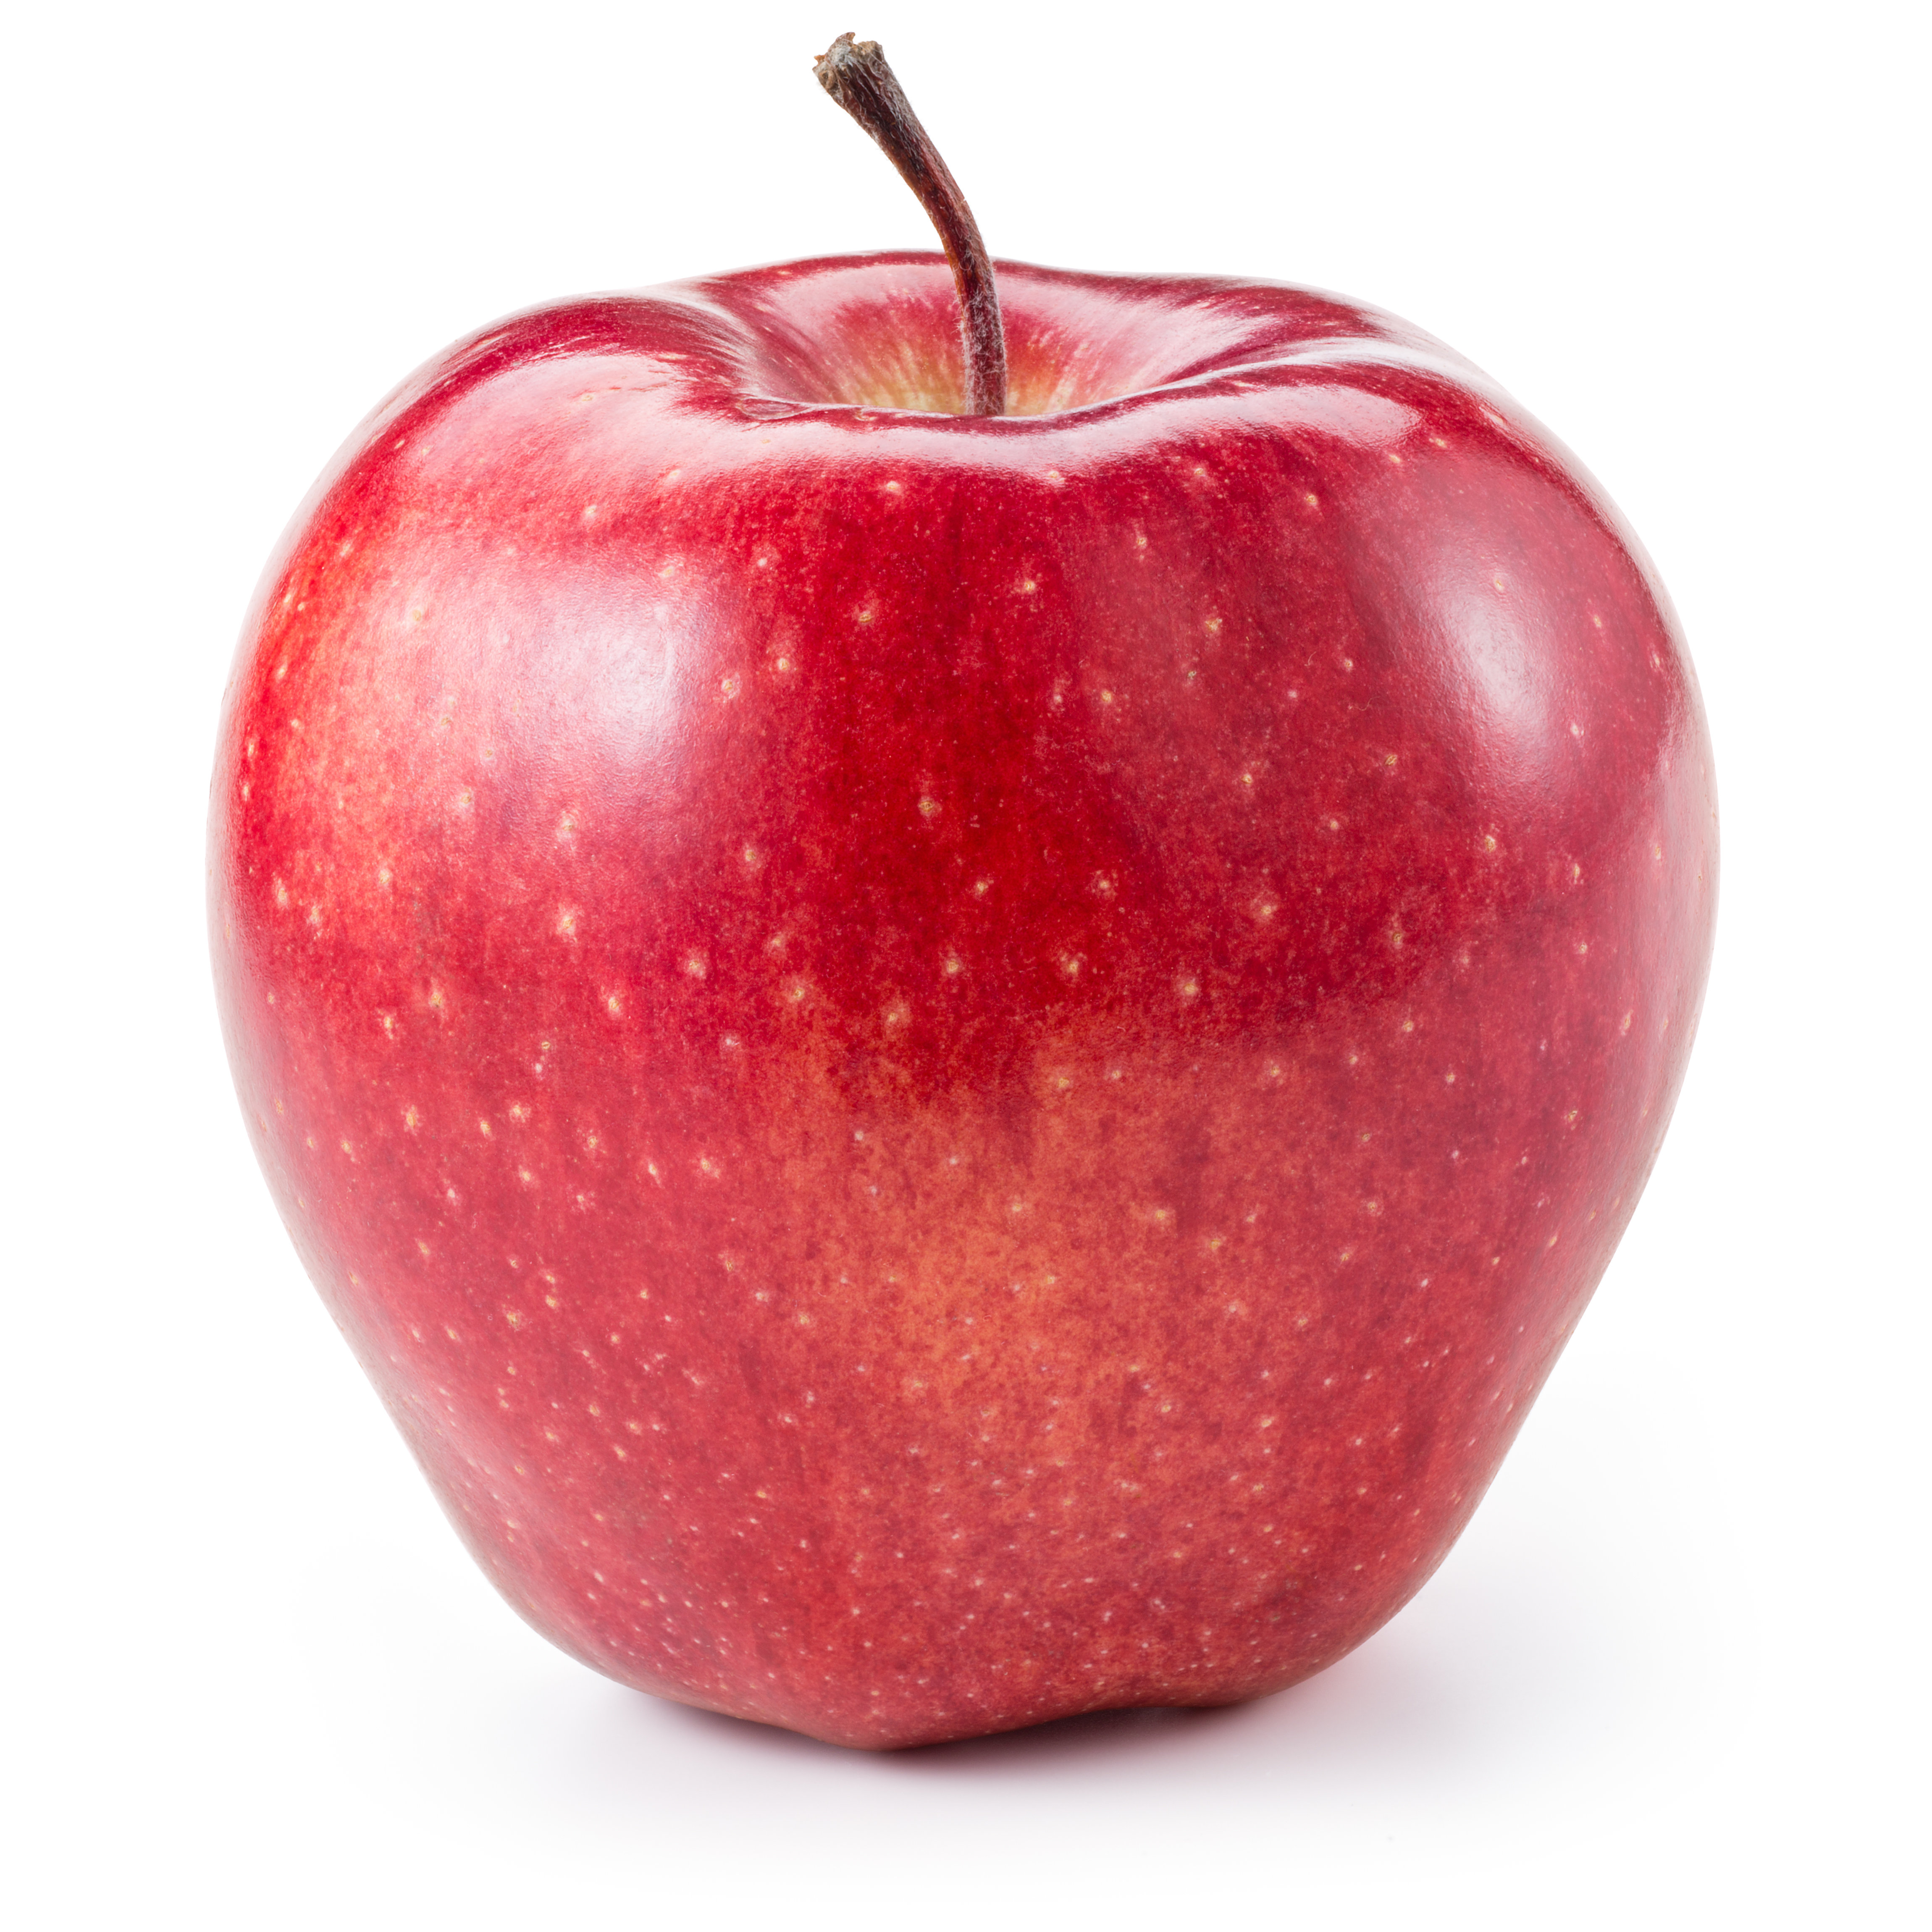 The Fresh Market - Cosmic Crisp Apples are an organic, juicy, and